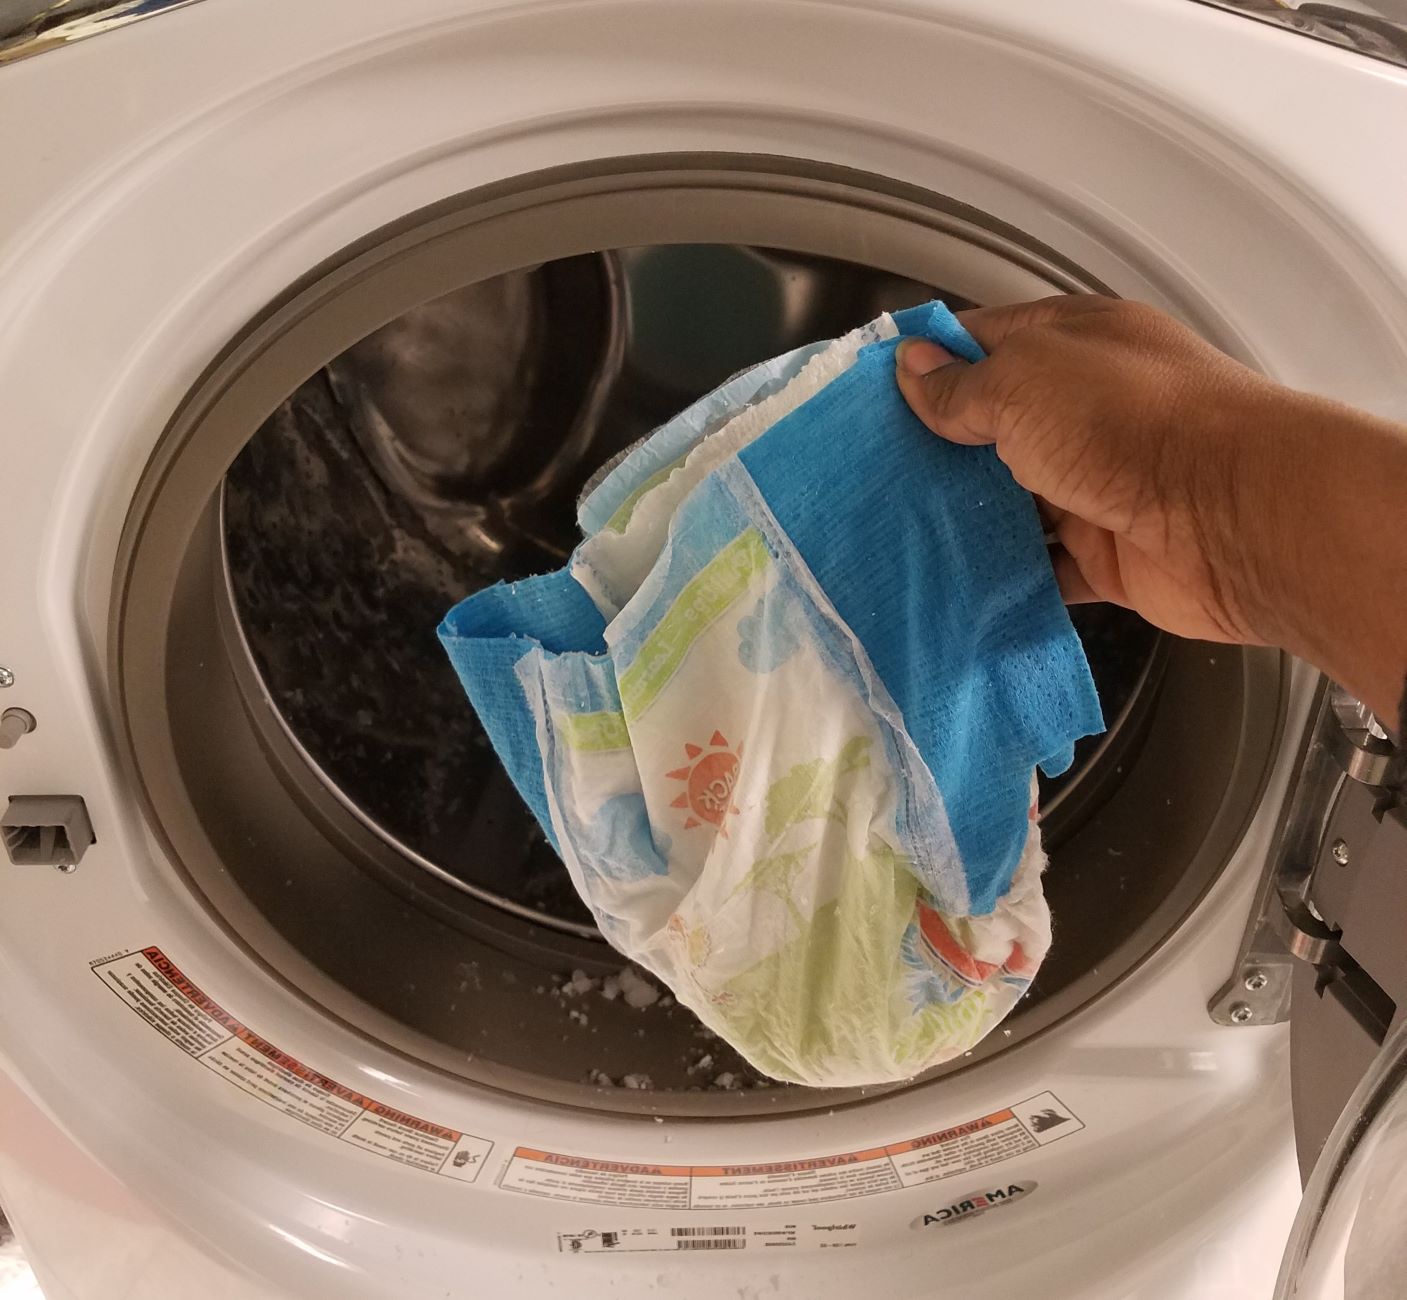 What To Do If You Accidentally Wash A Diaper In The Washing Machine